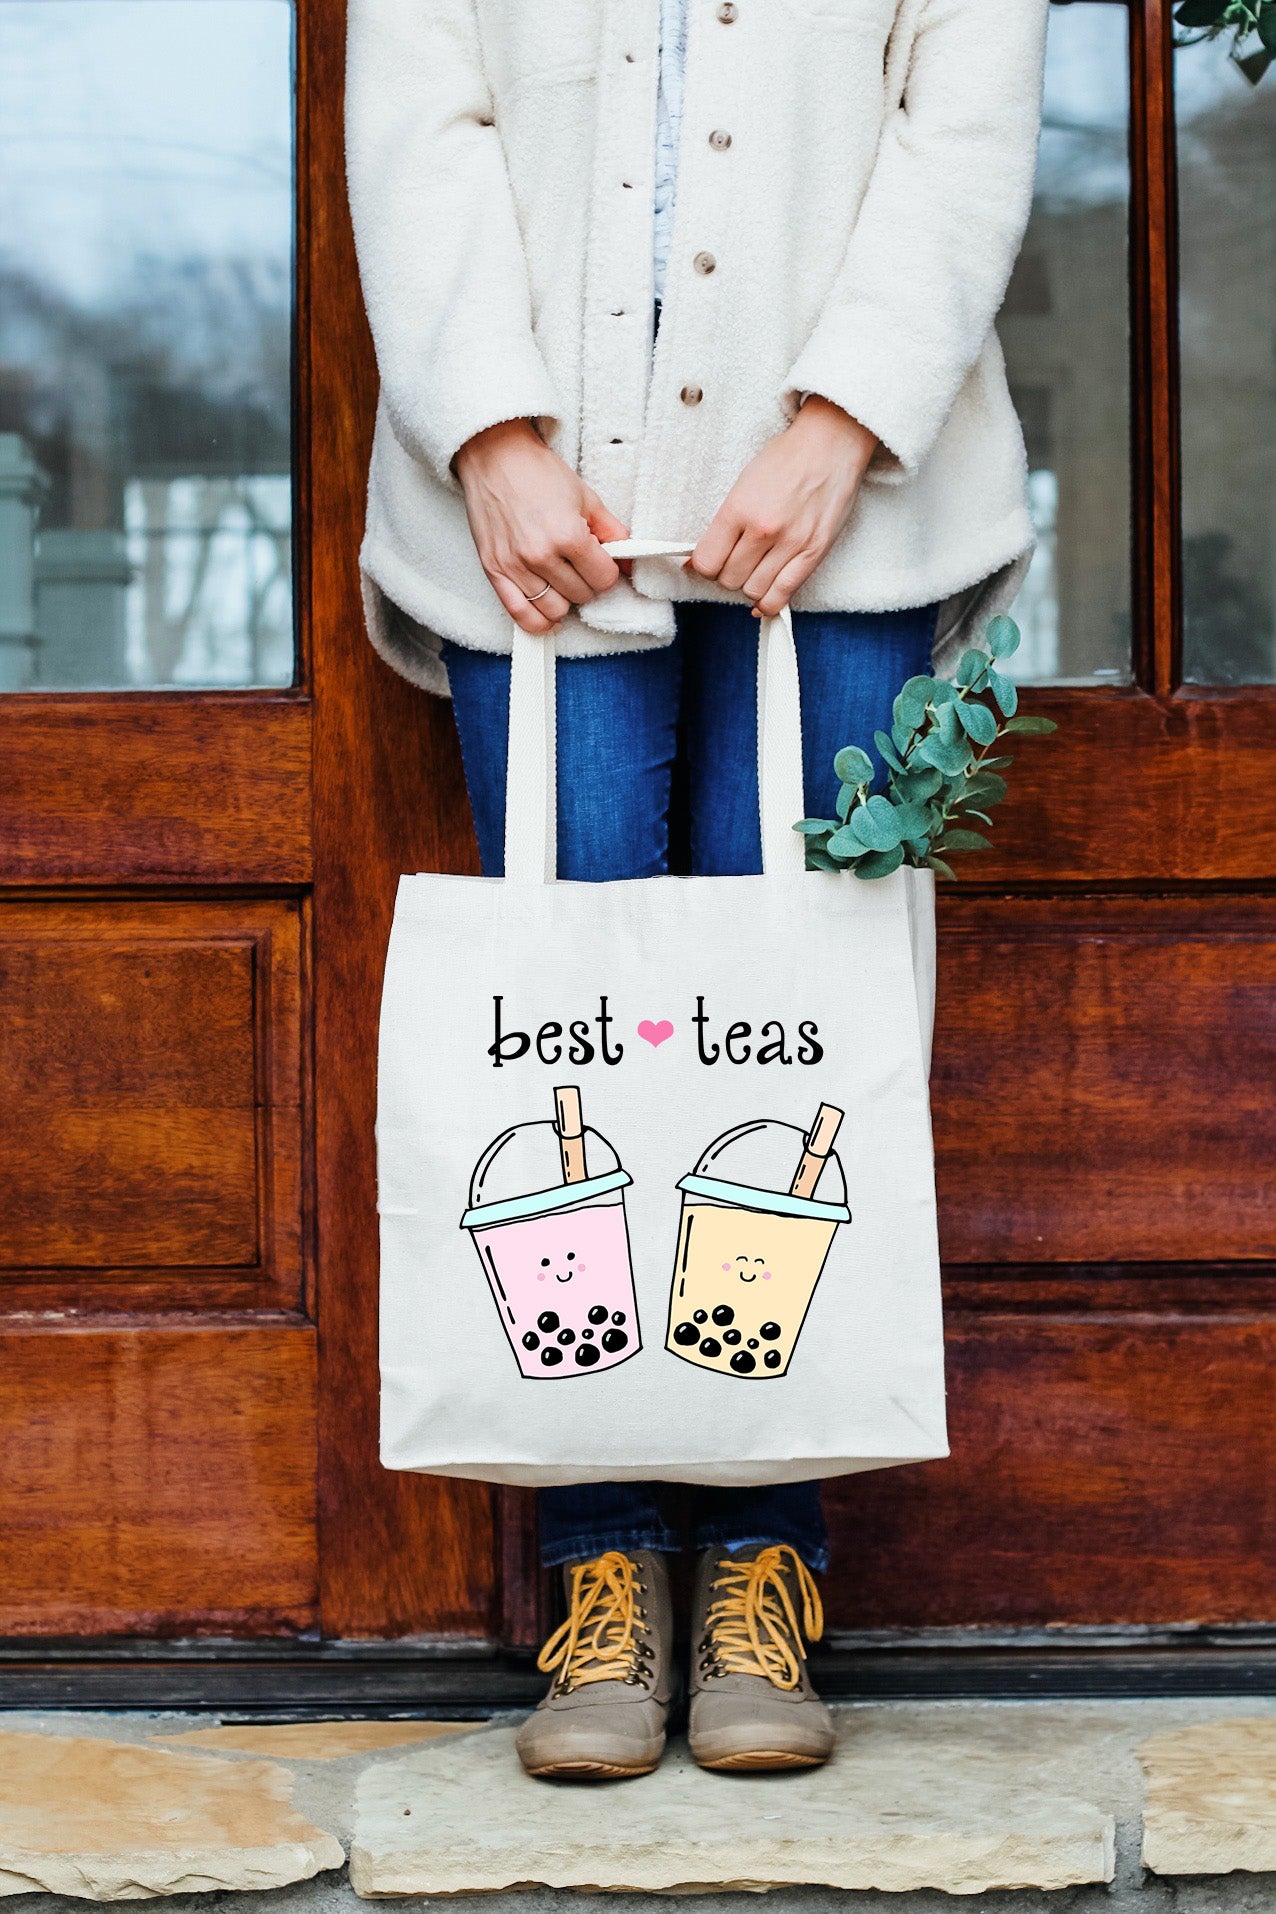 a woman holding a bag that says best teas